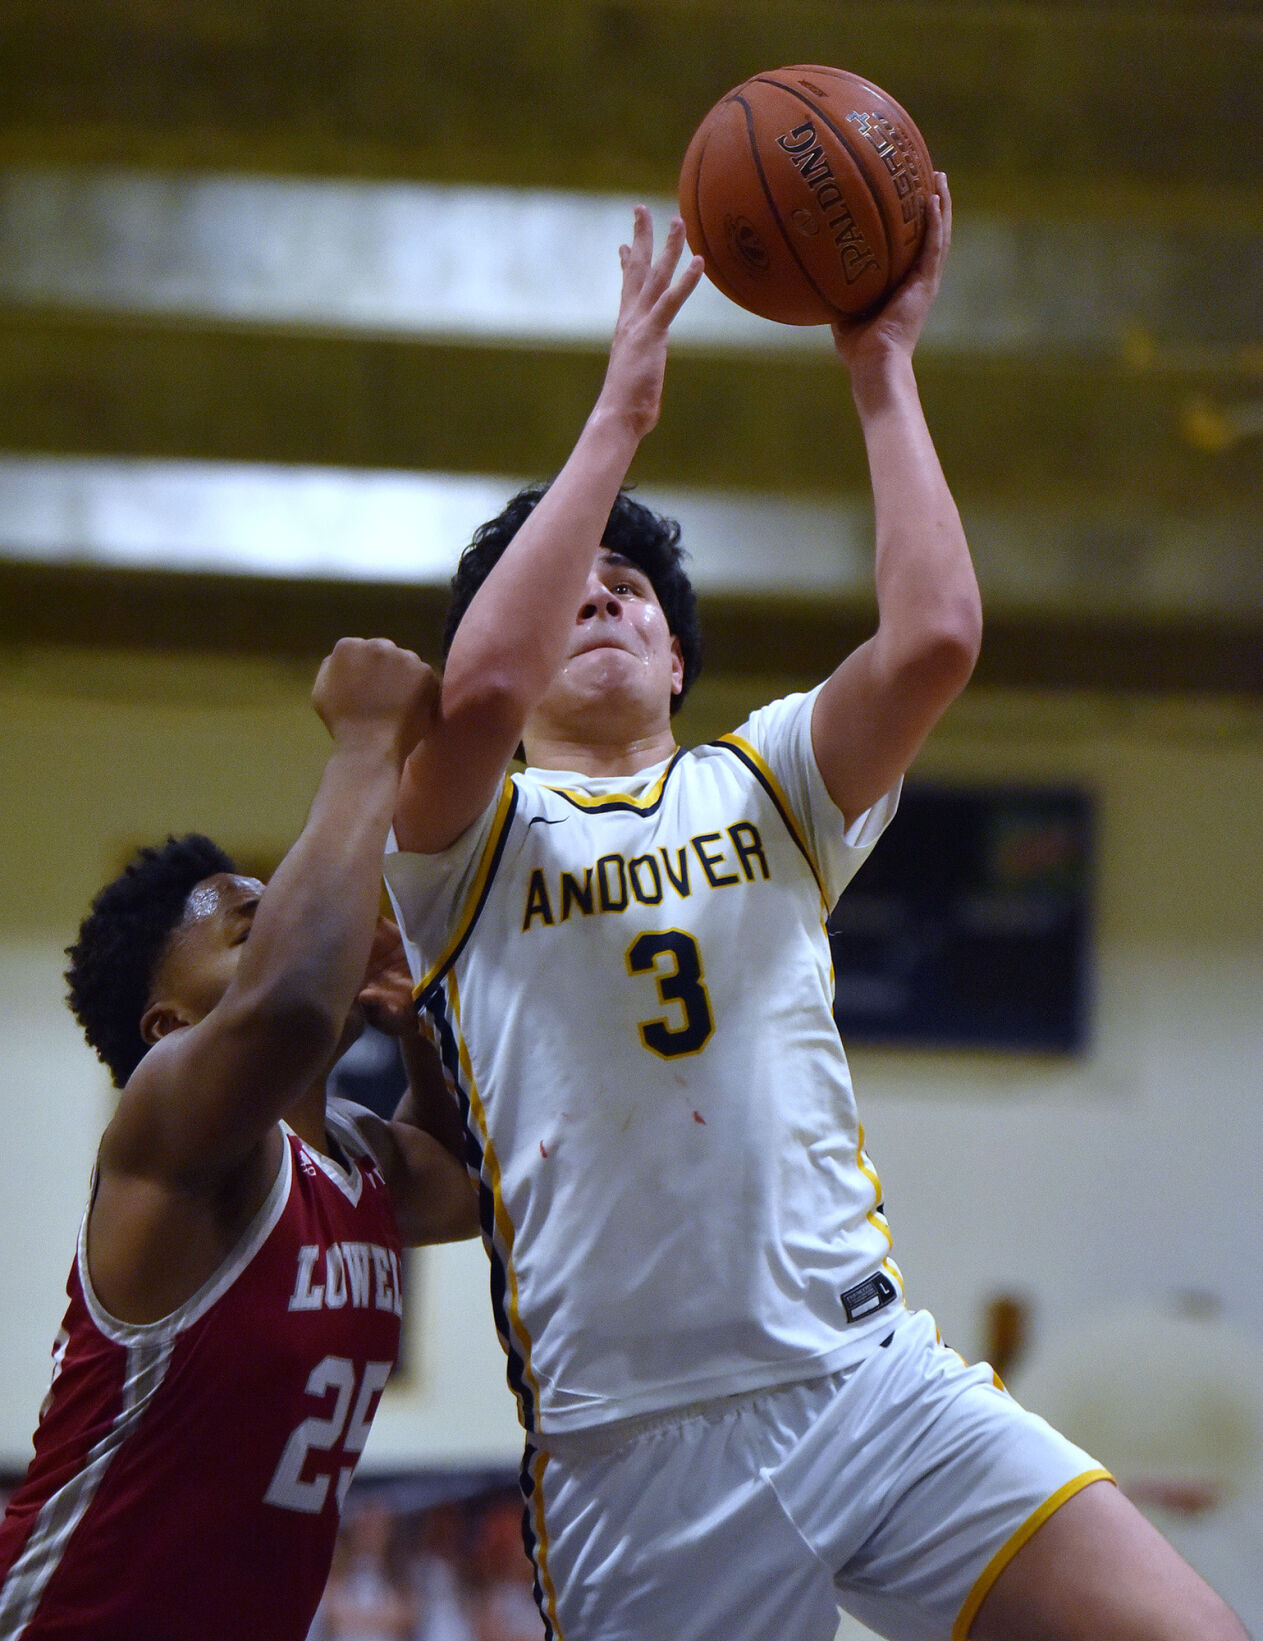 Luca Palermo’s Basketball Journey: Andover Forward Transfers to St. Mark’s for D1 Dream